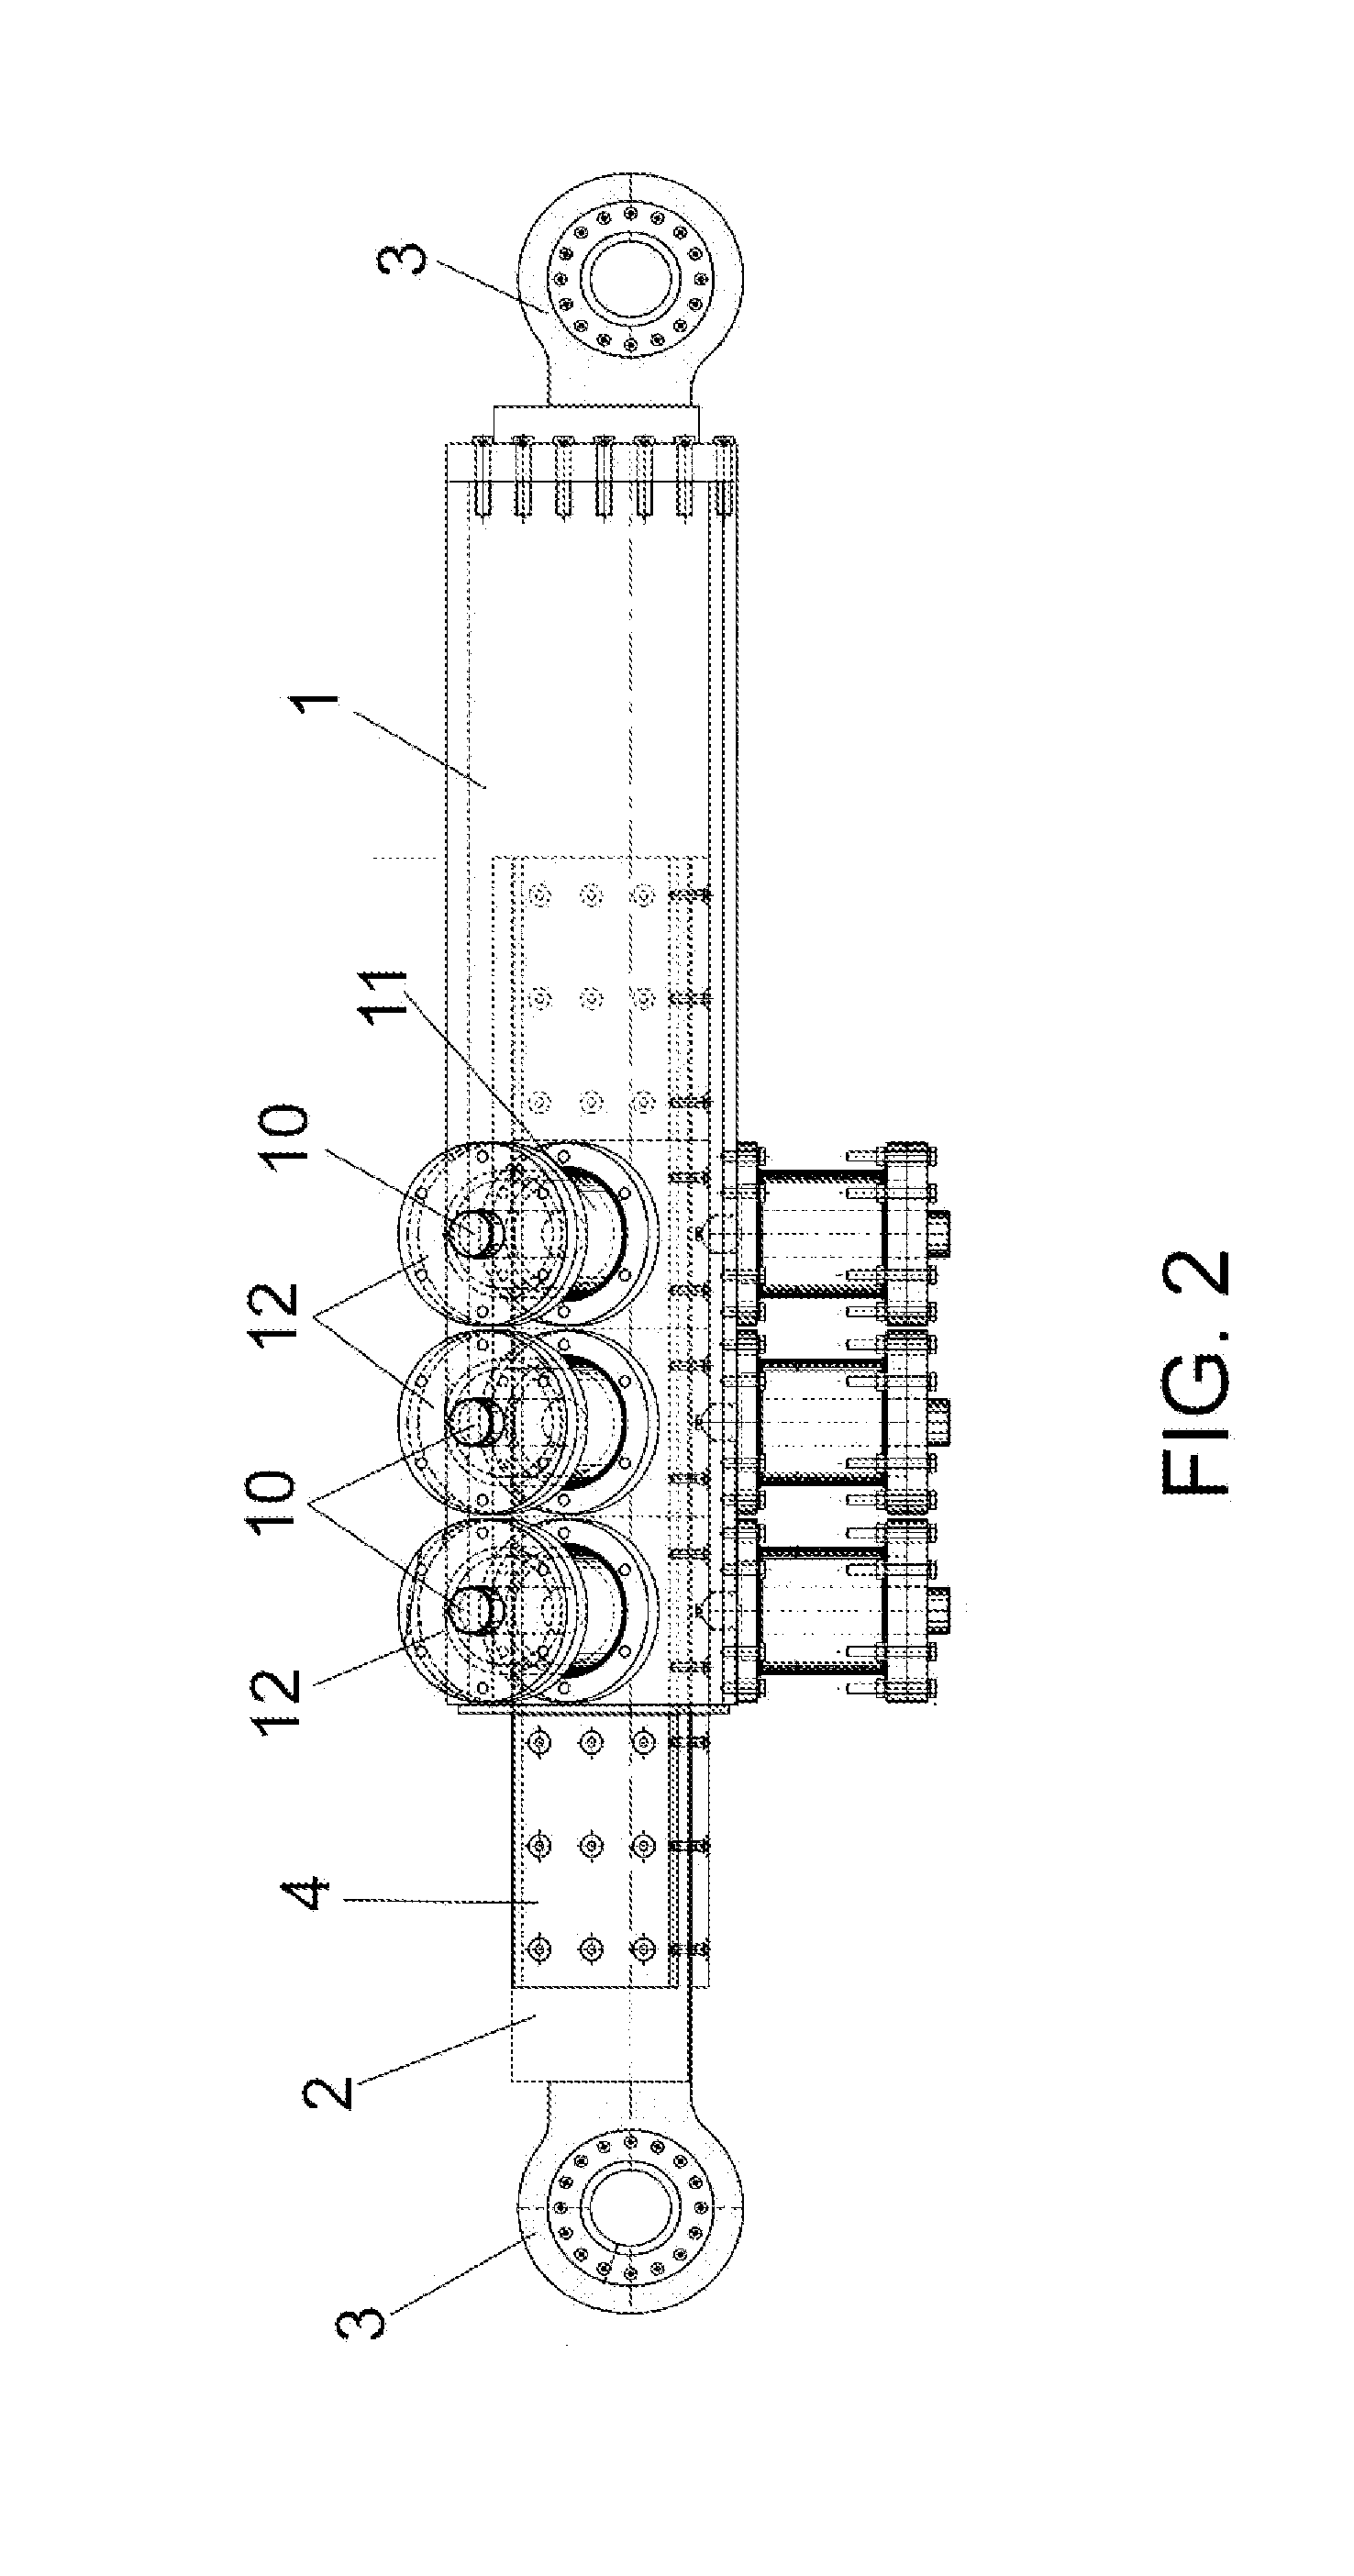 Mechanical Device for the Seismic Protection of Civil Works